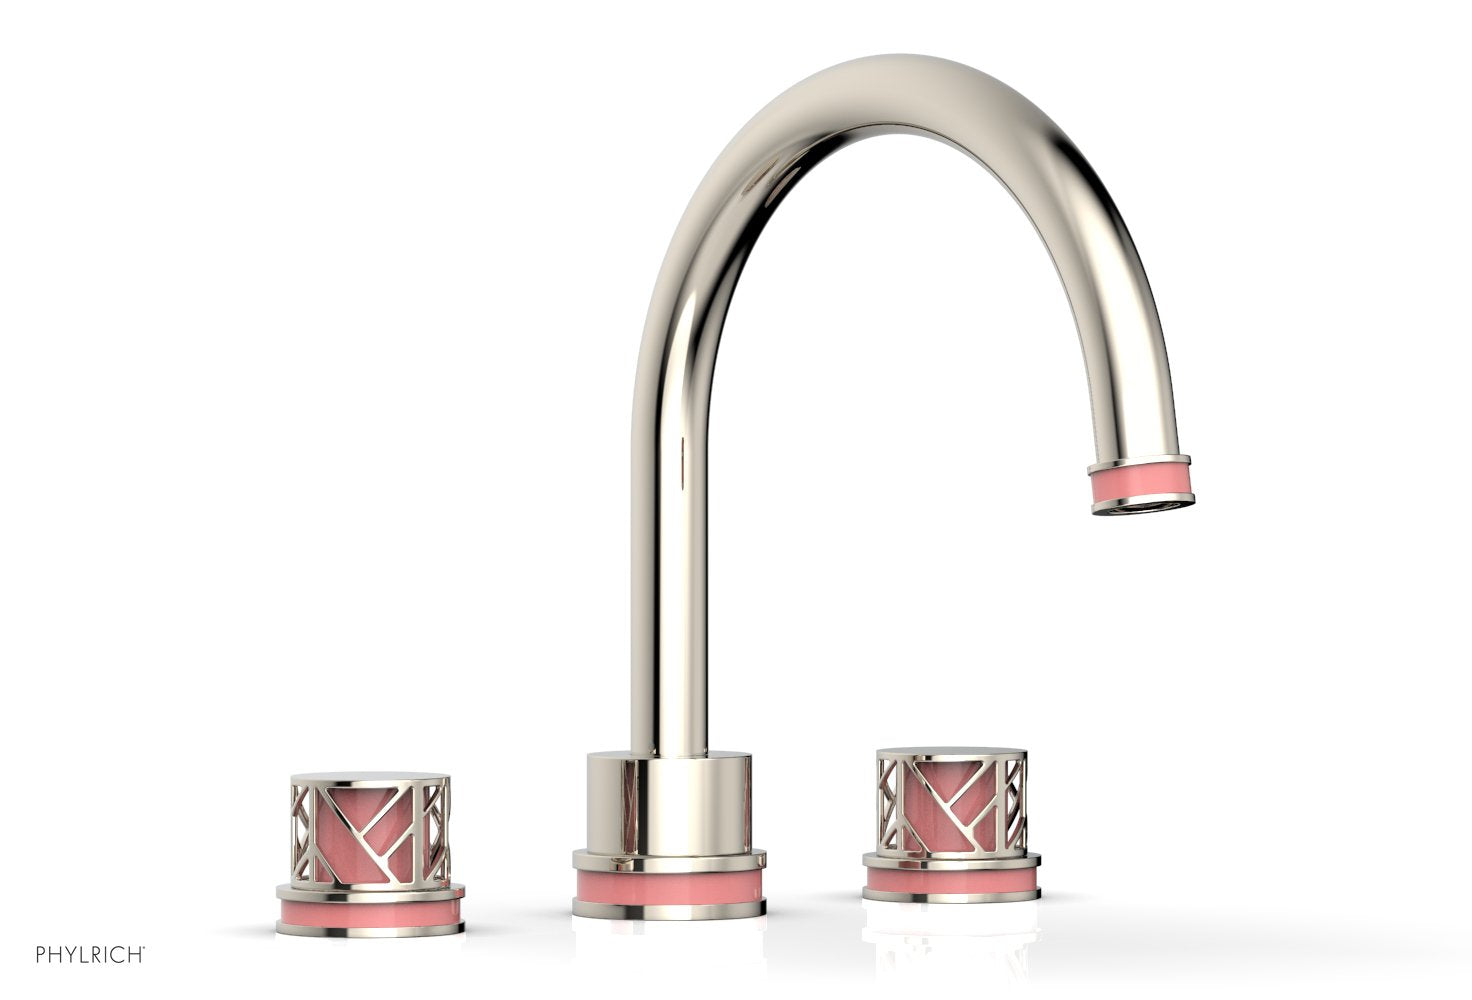 Phylrich JOLIE Deck Tub Set - Round Handles with "Pink" Accents